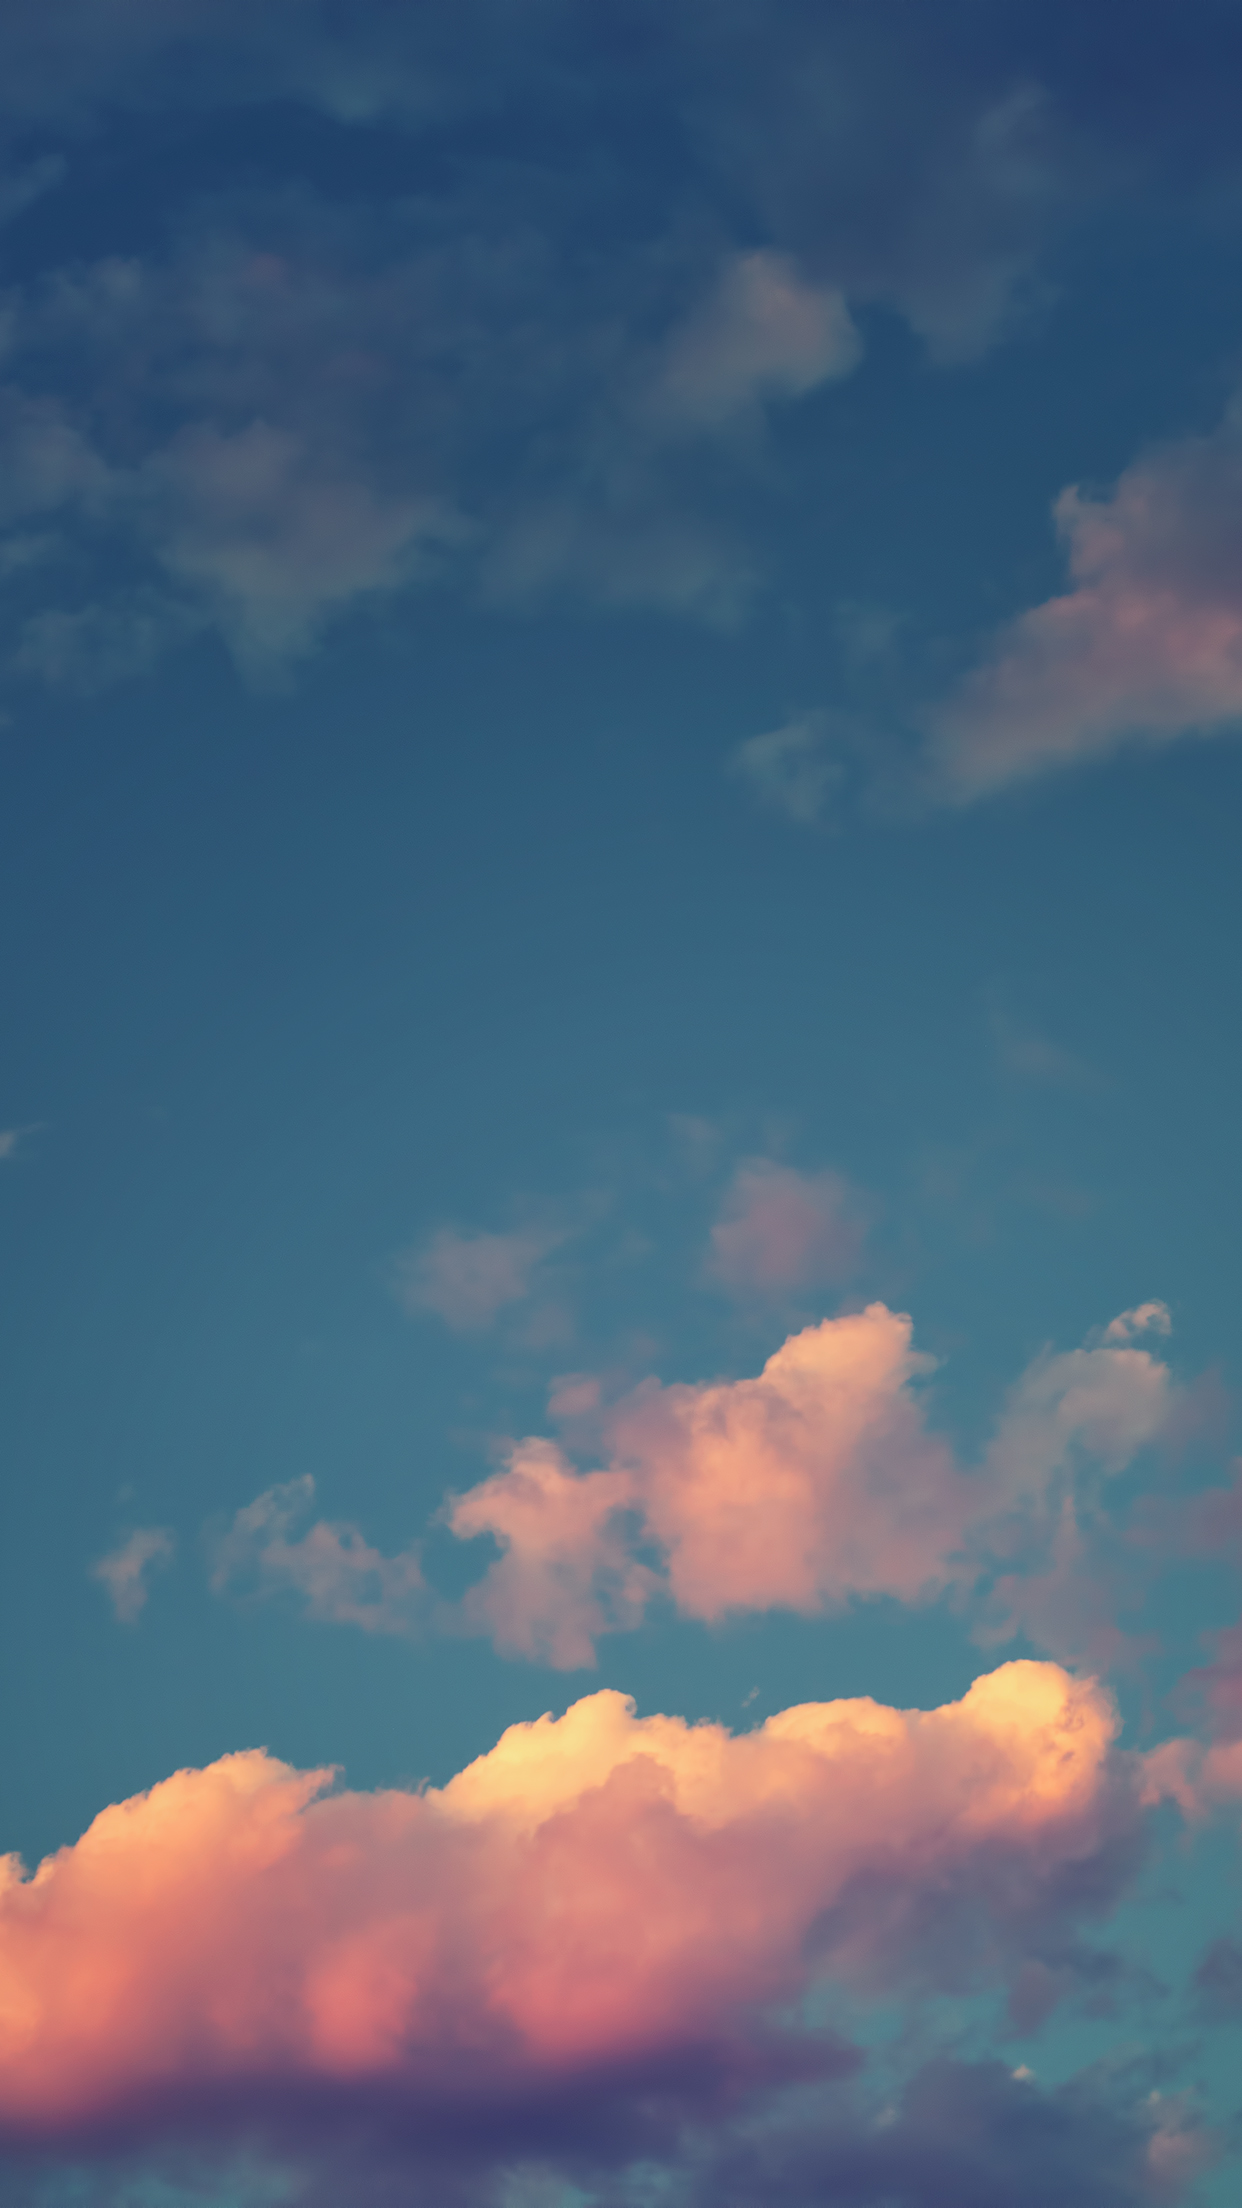 Clouds wallpaper iphone android background followme  Clouds wallpaper  iphone Aesthetic backgrounds Sky aesthetic